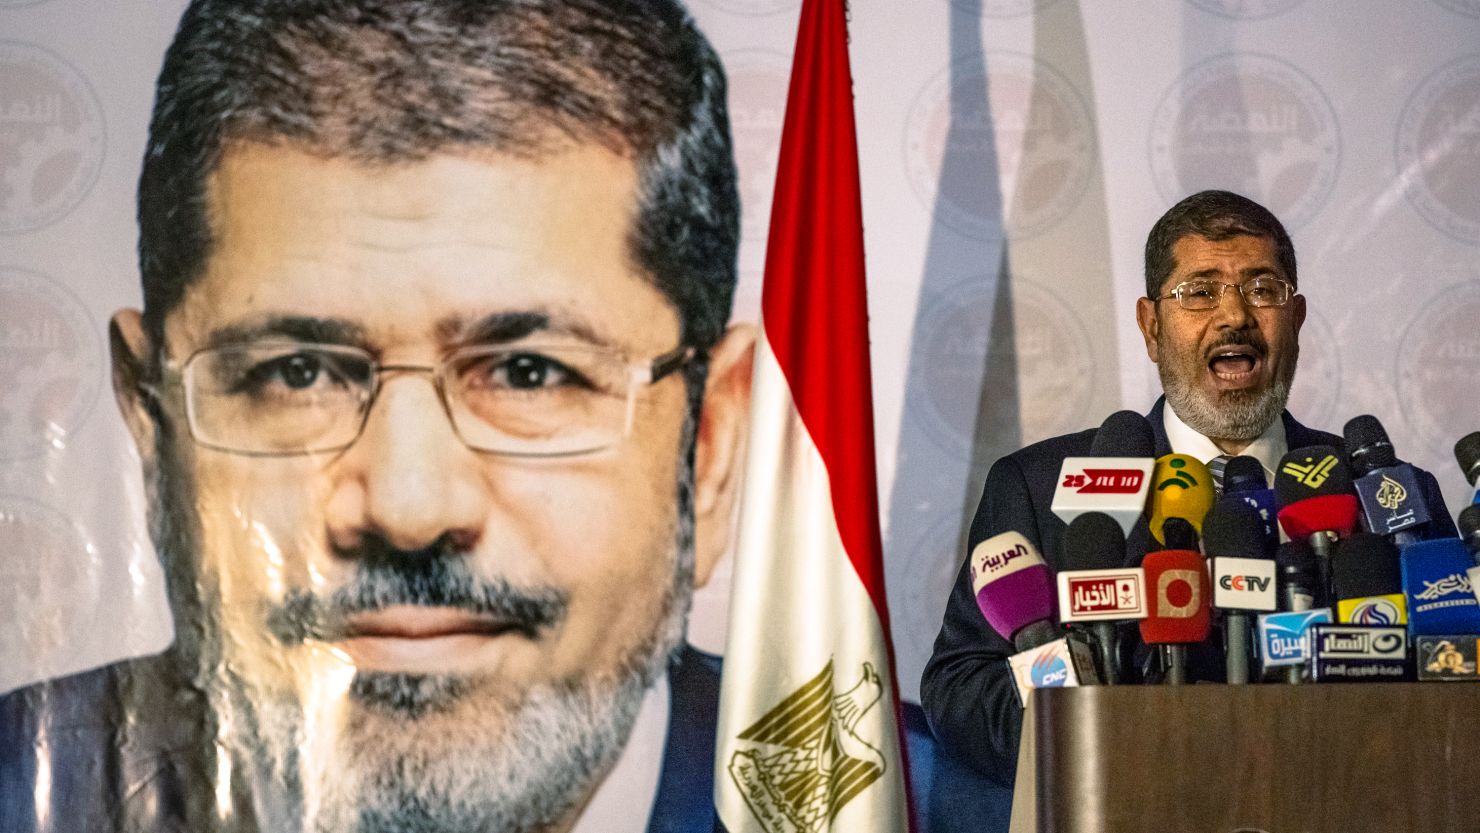 Egyptian presidential candidate Mohamed Morsi of the Muslim Brotherhood speaks at a press conference.